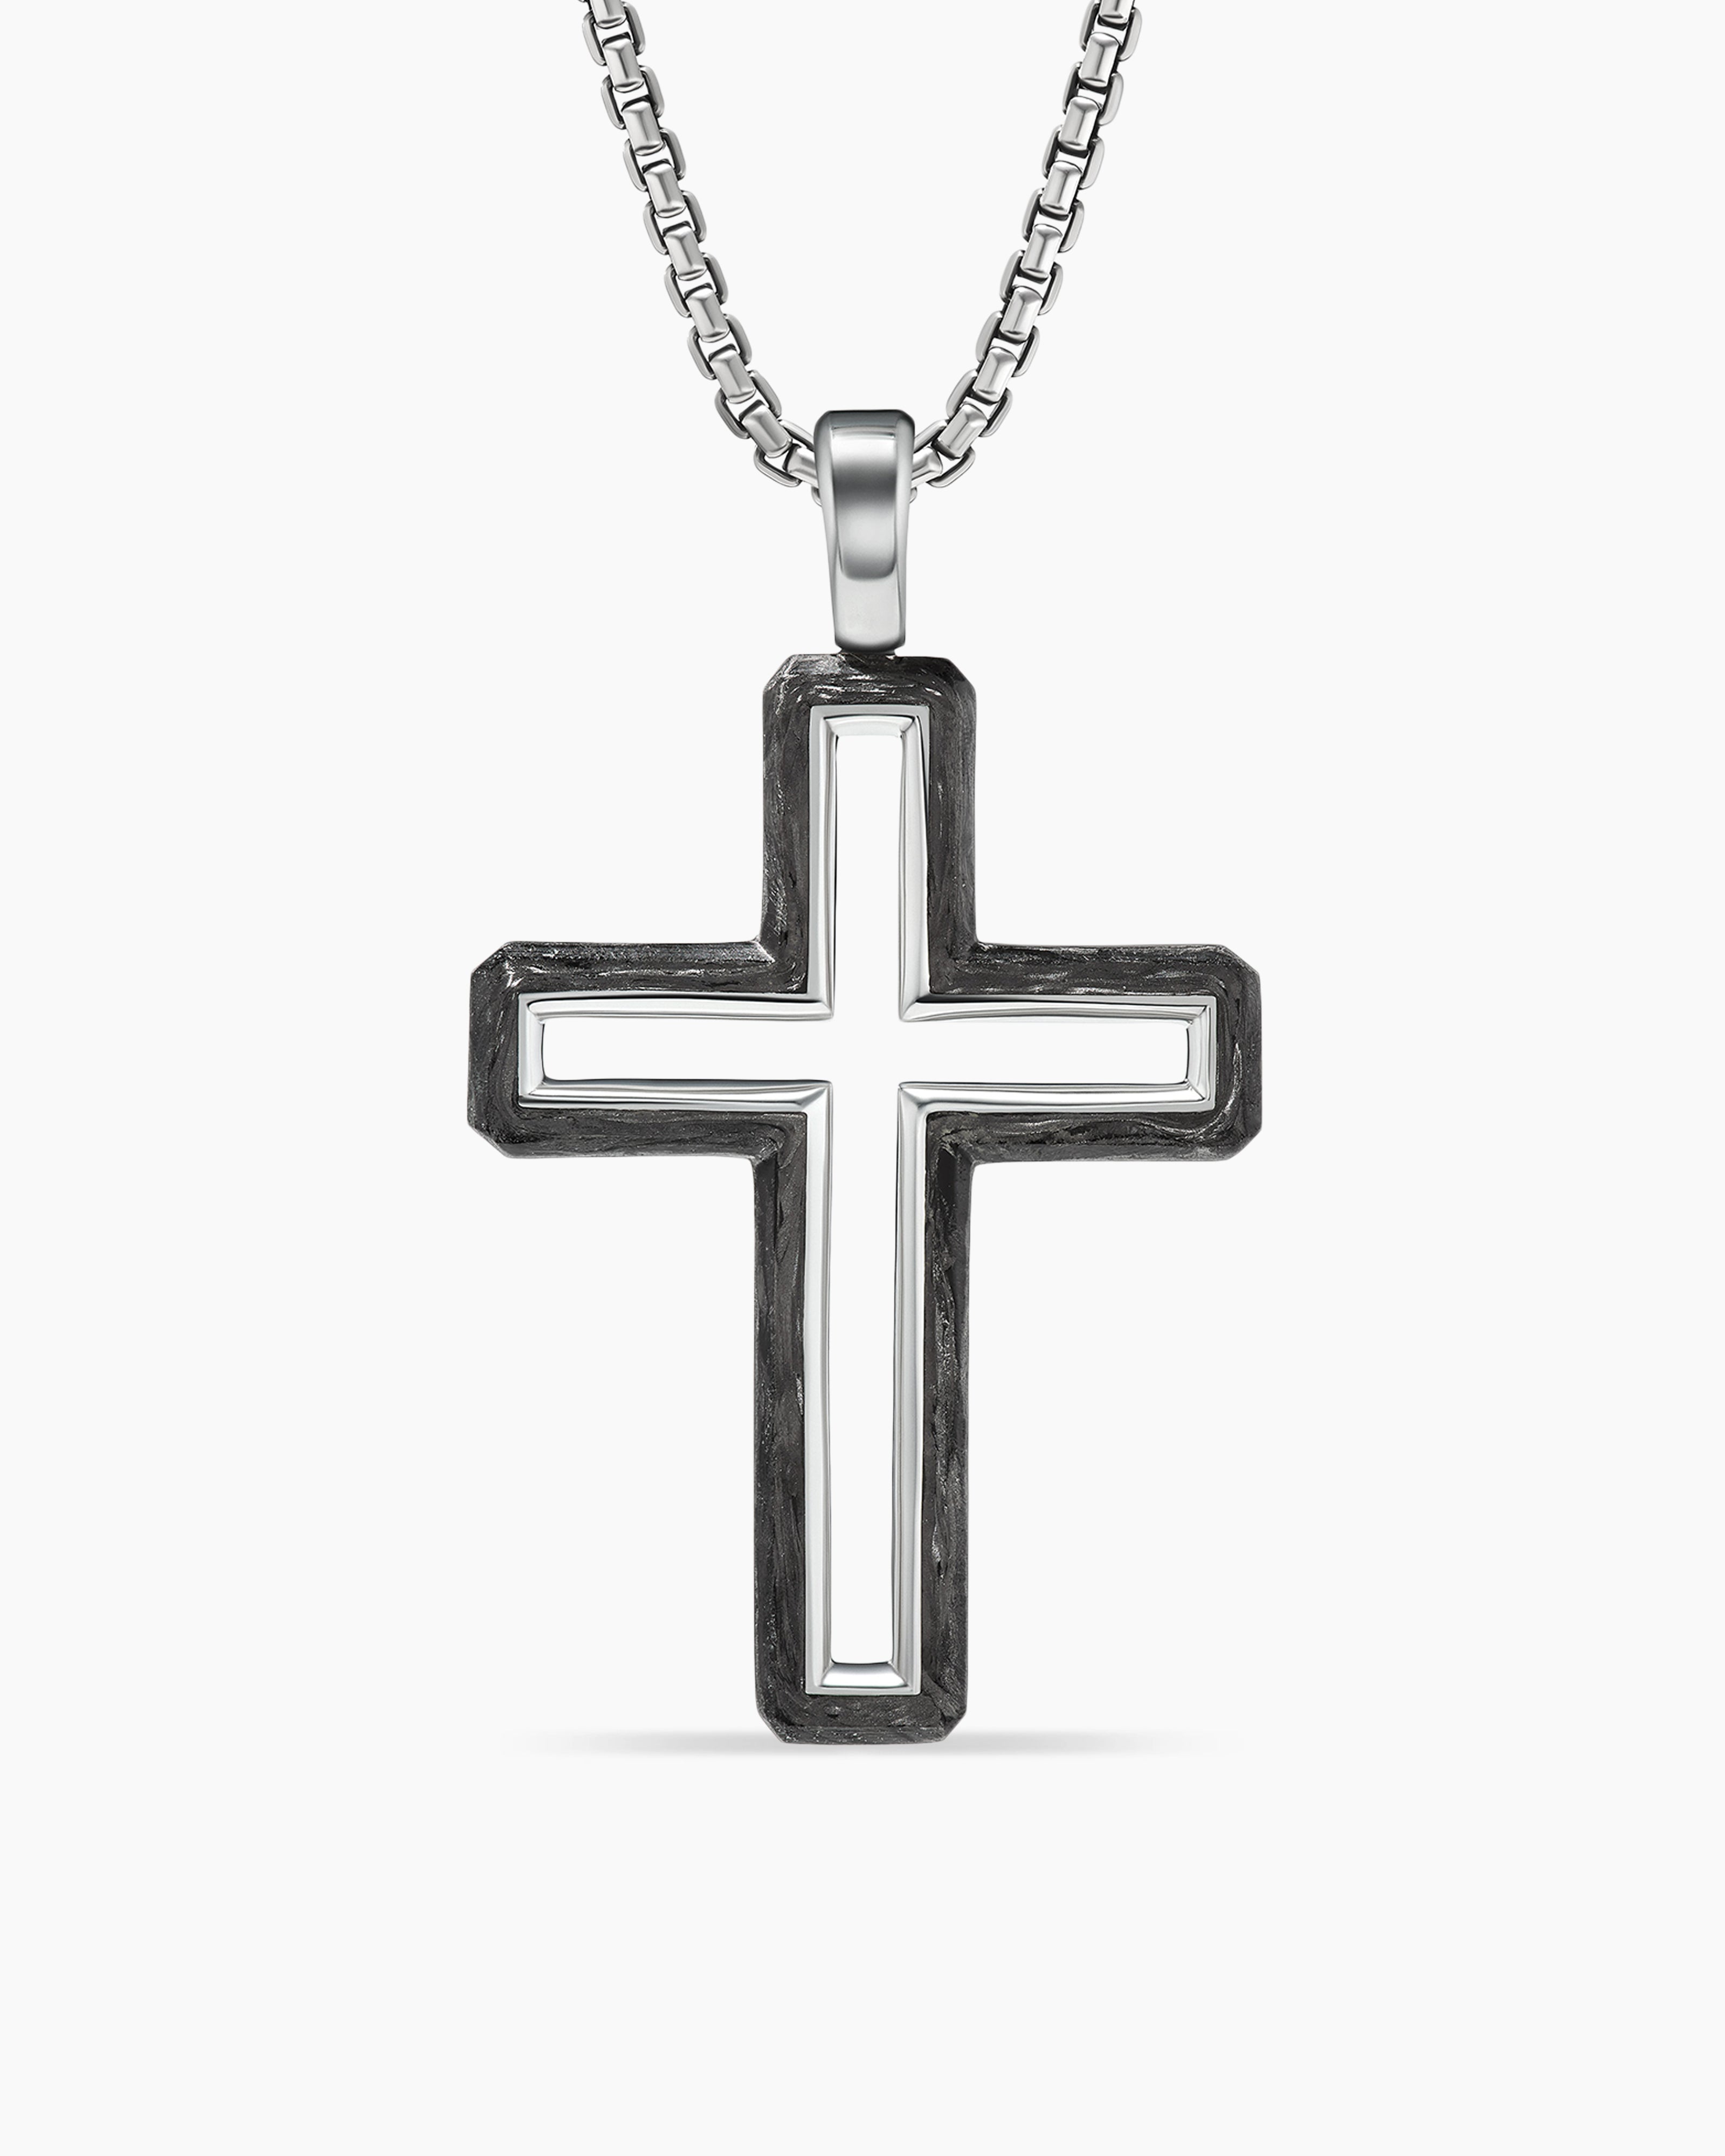 Mens Cross Necklace, Sterling Silver | Tomerm Jewelry | Wolf & Badger